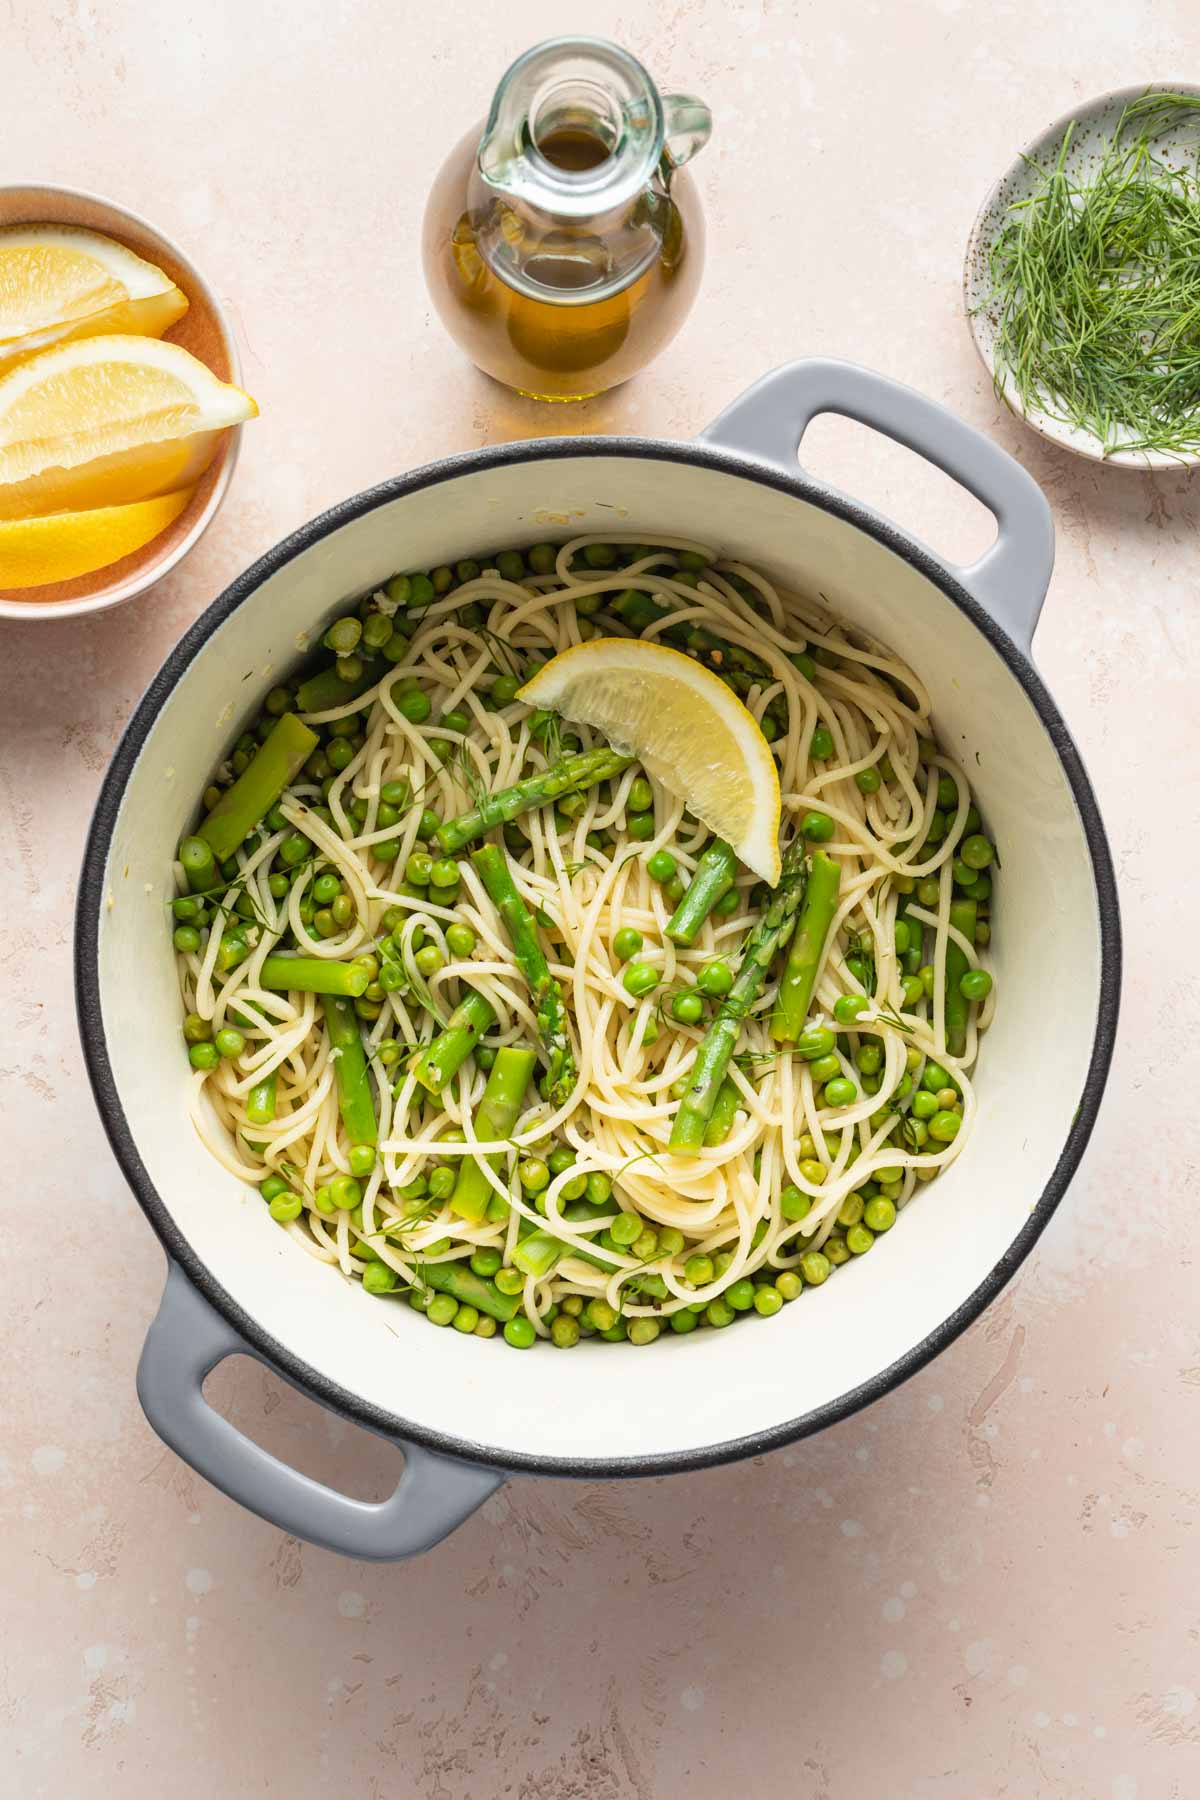 Lemon garlic pasta with peas and asparagus in a pot.